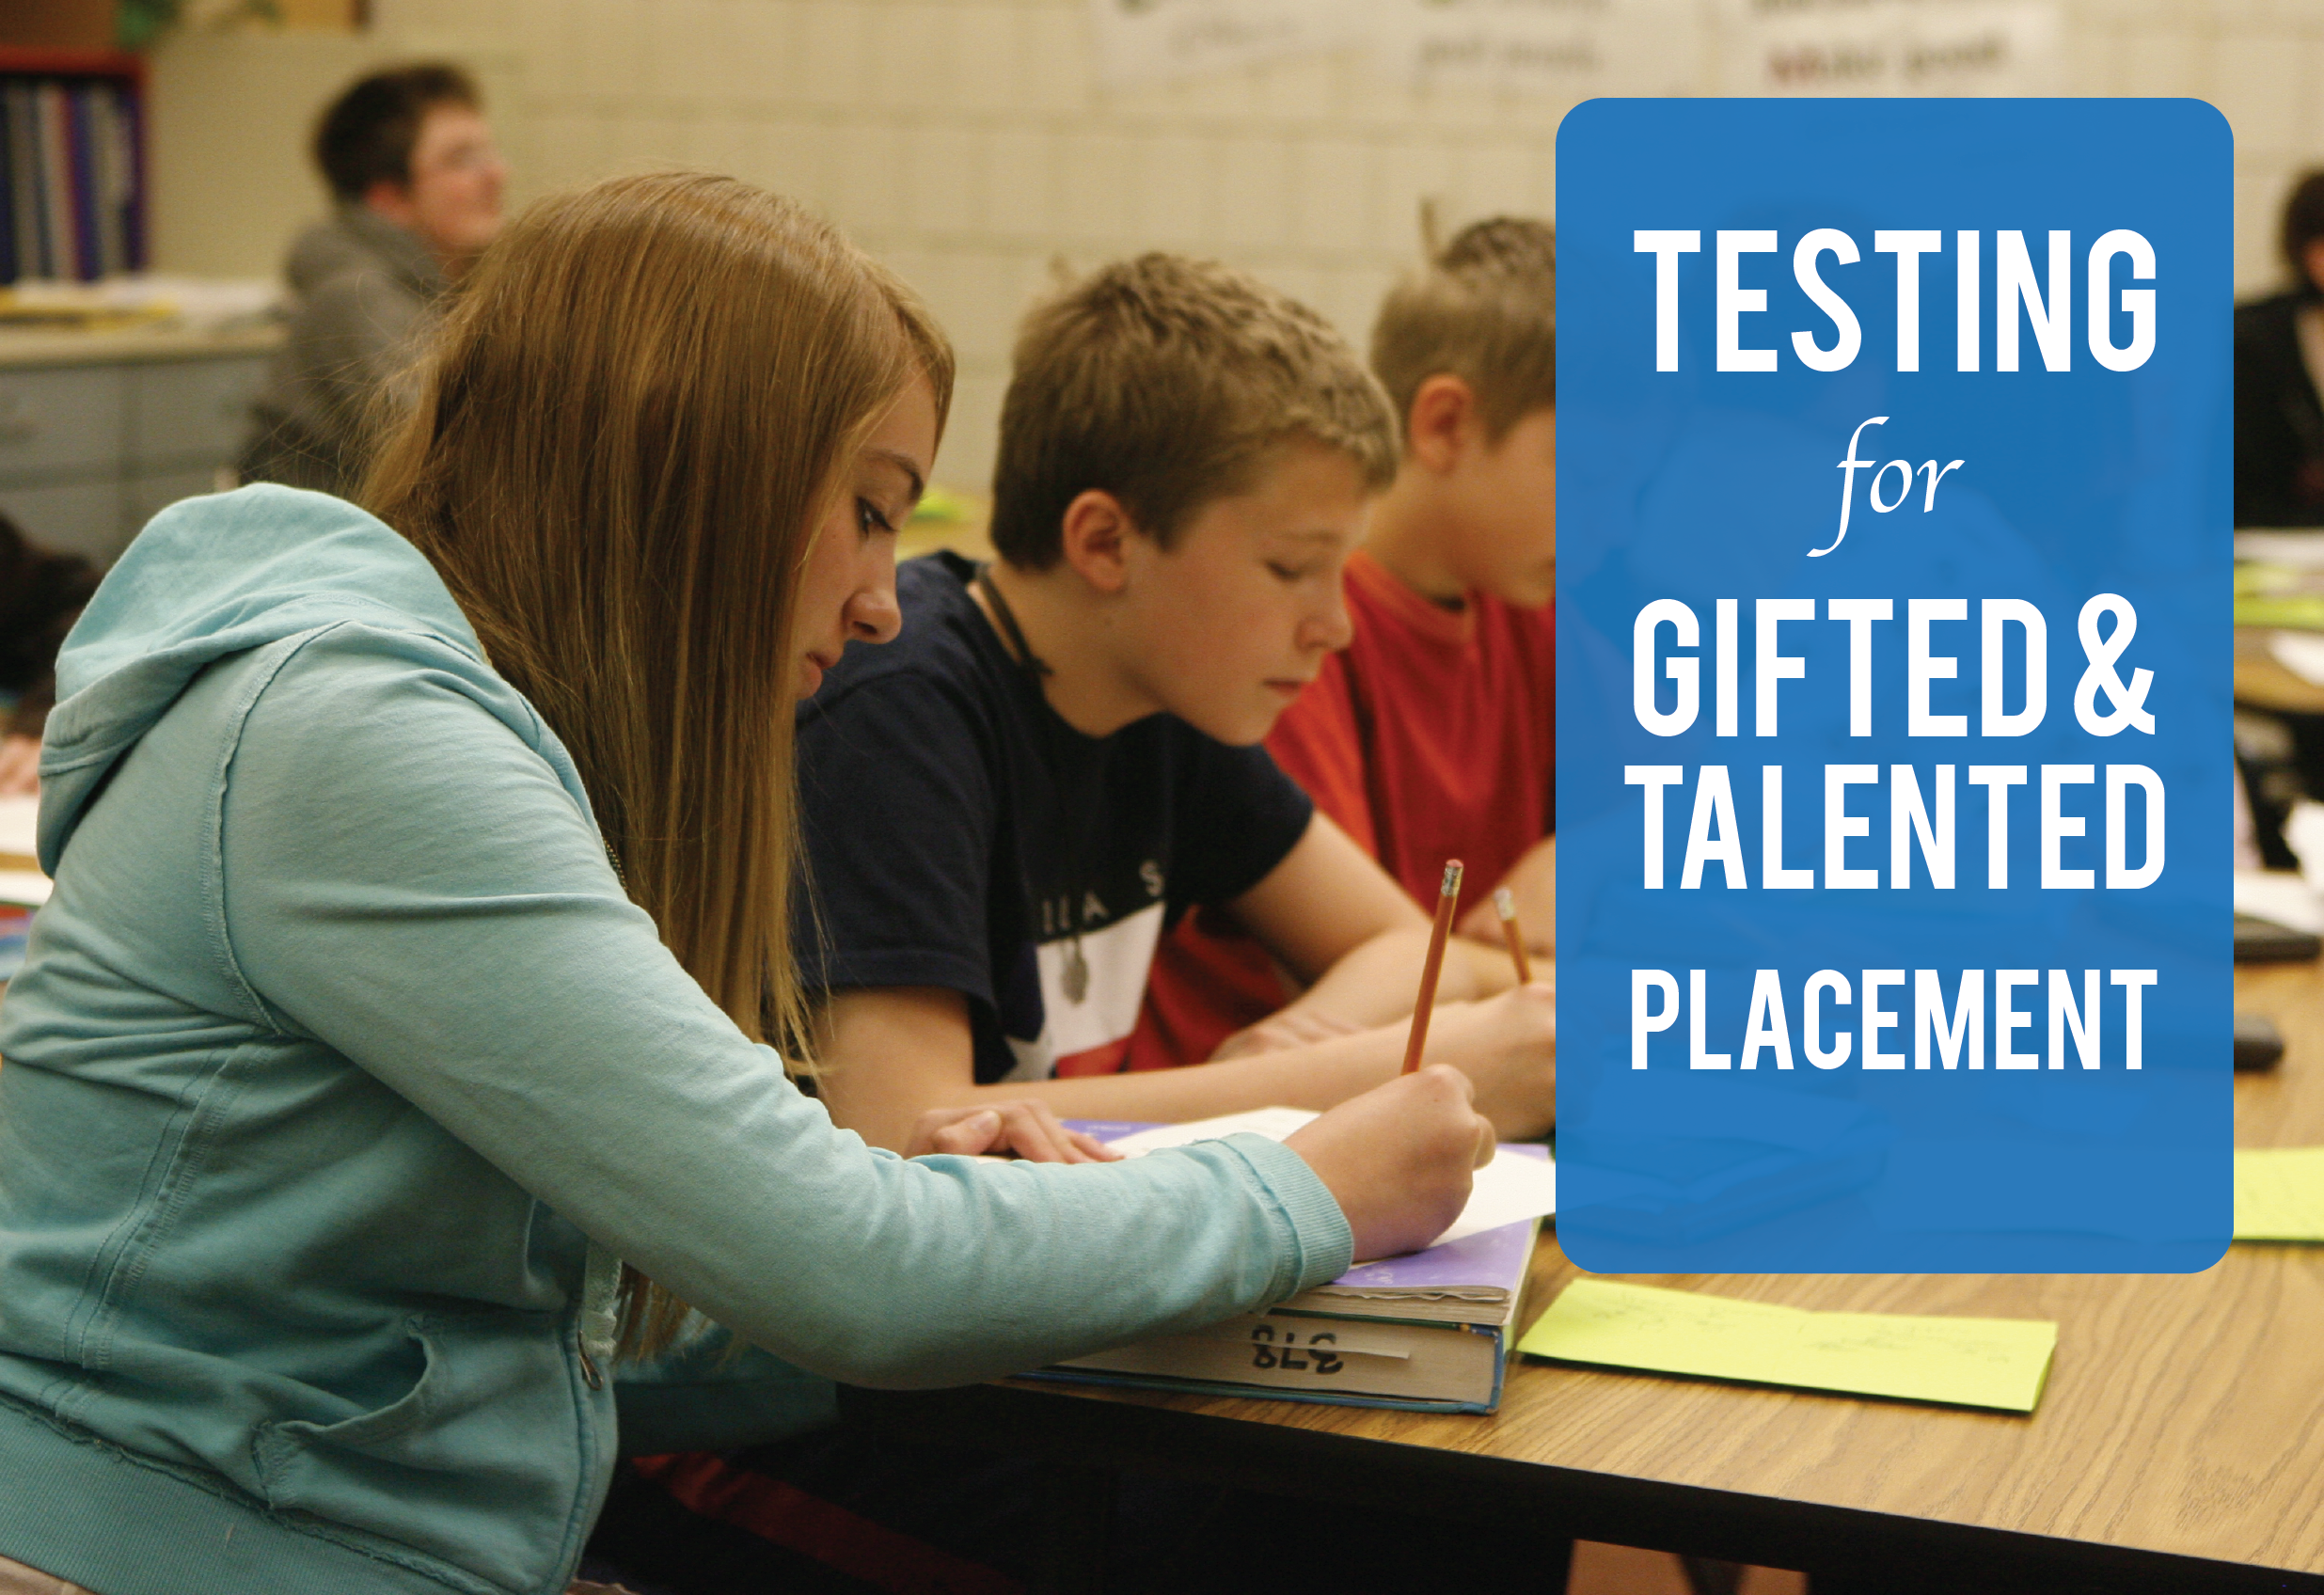 Testing window for gifted & talented placement